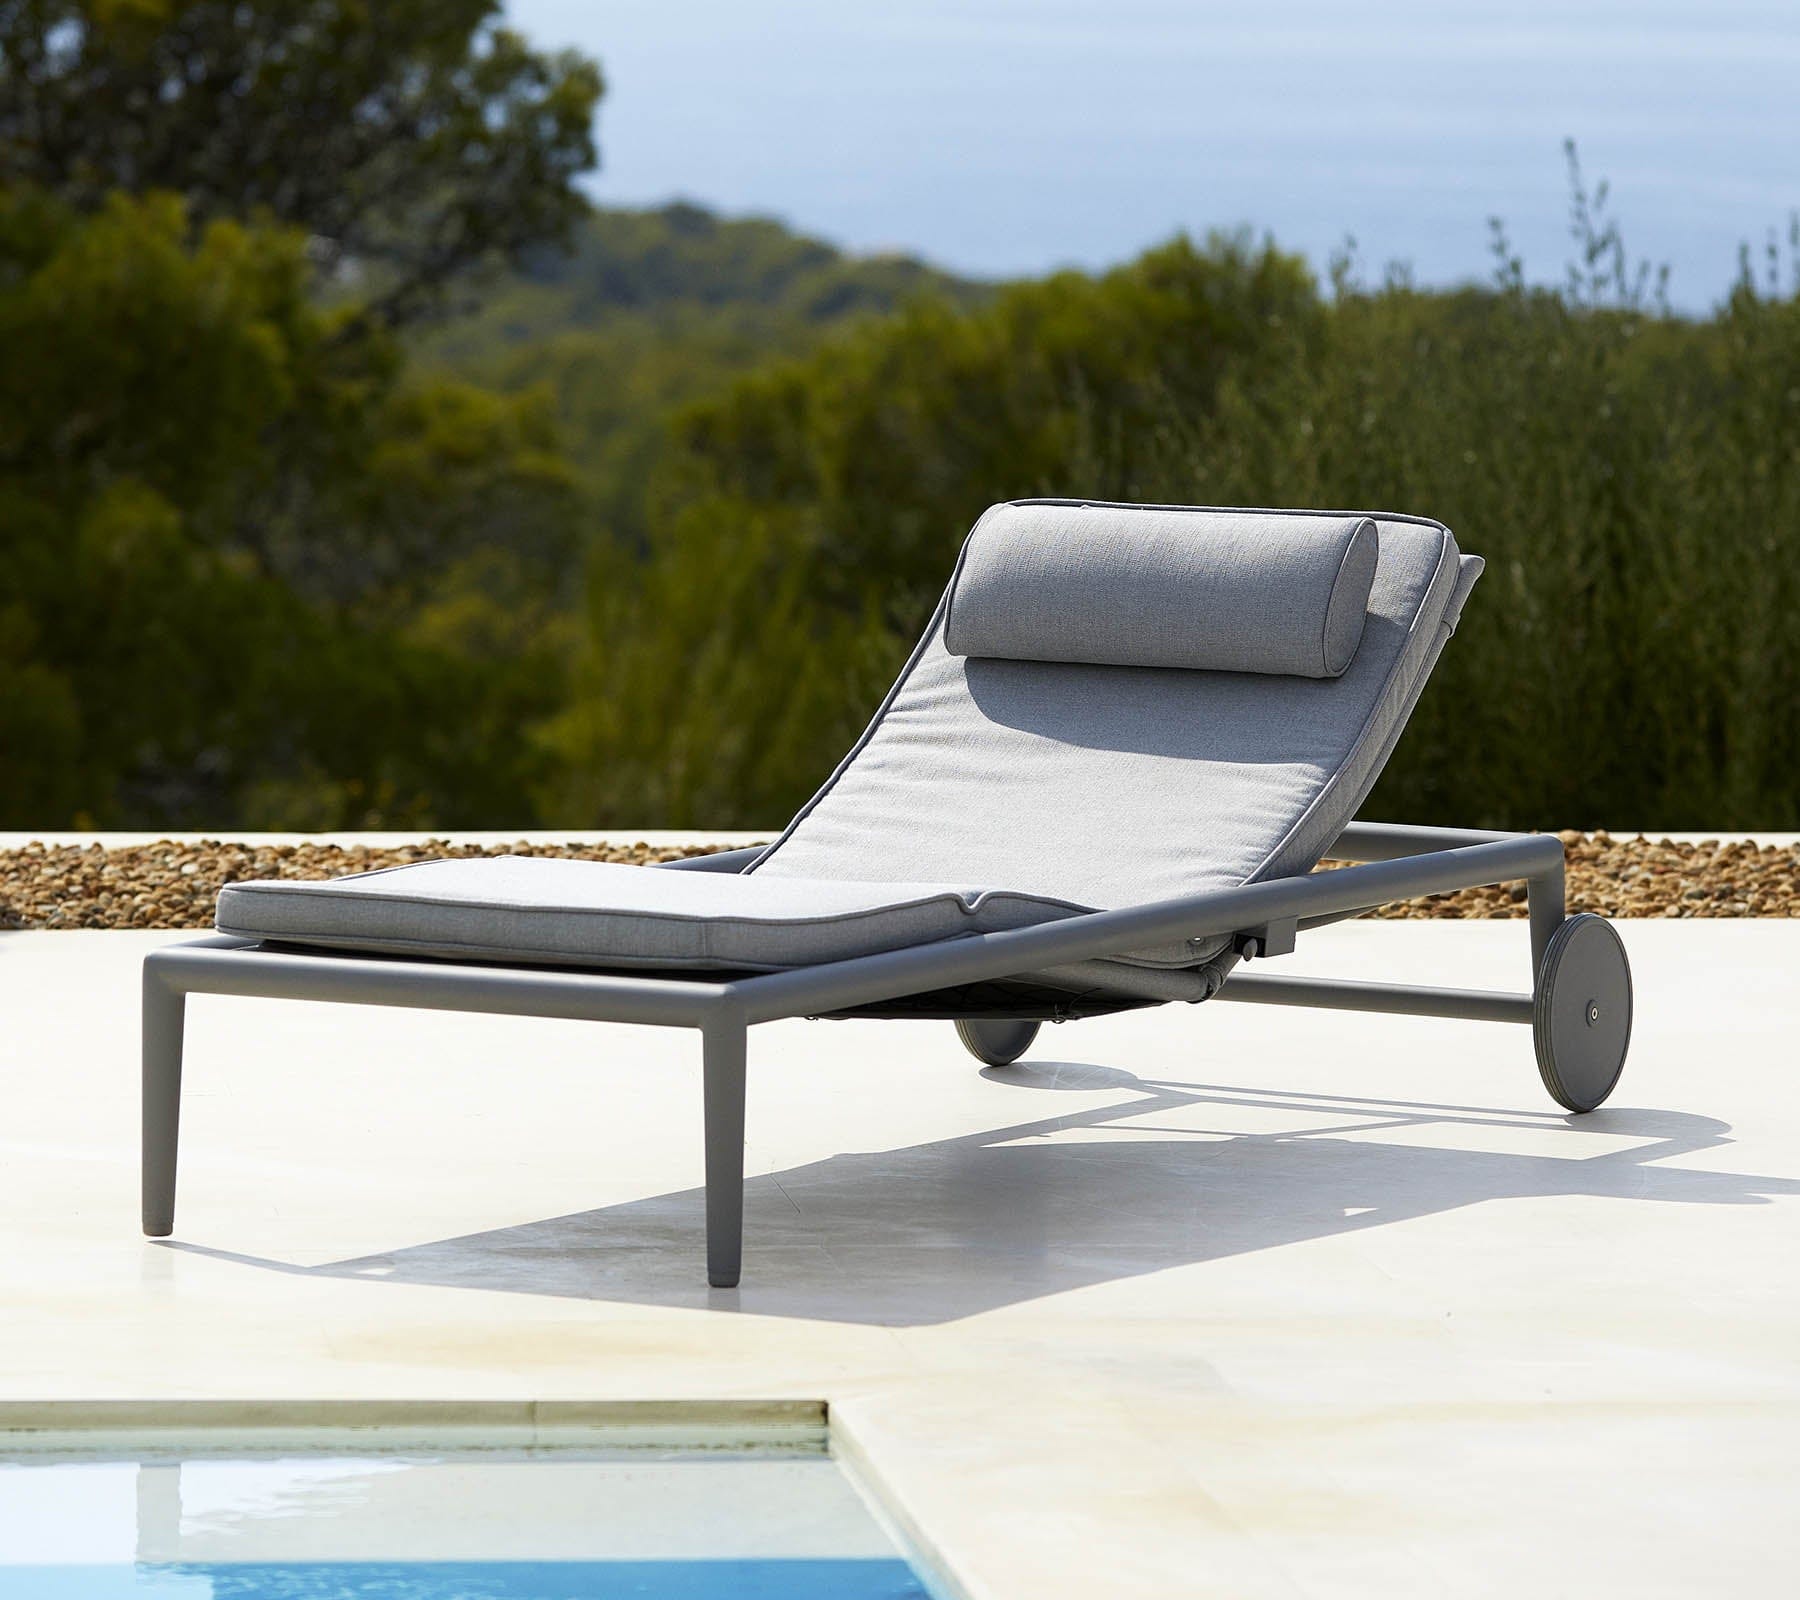 Boxhill's Conic Rolling Chaise Lounge Sunbed Light Grey lifestyle image at poolside